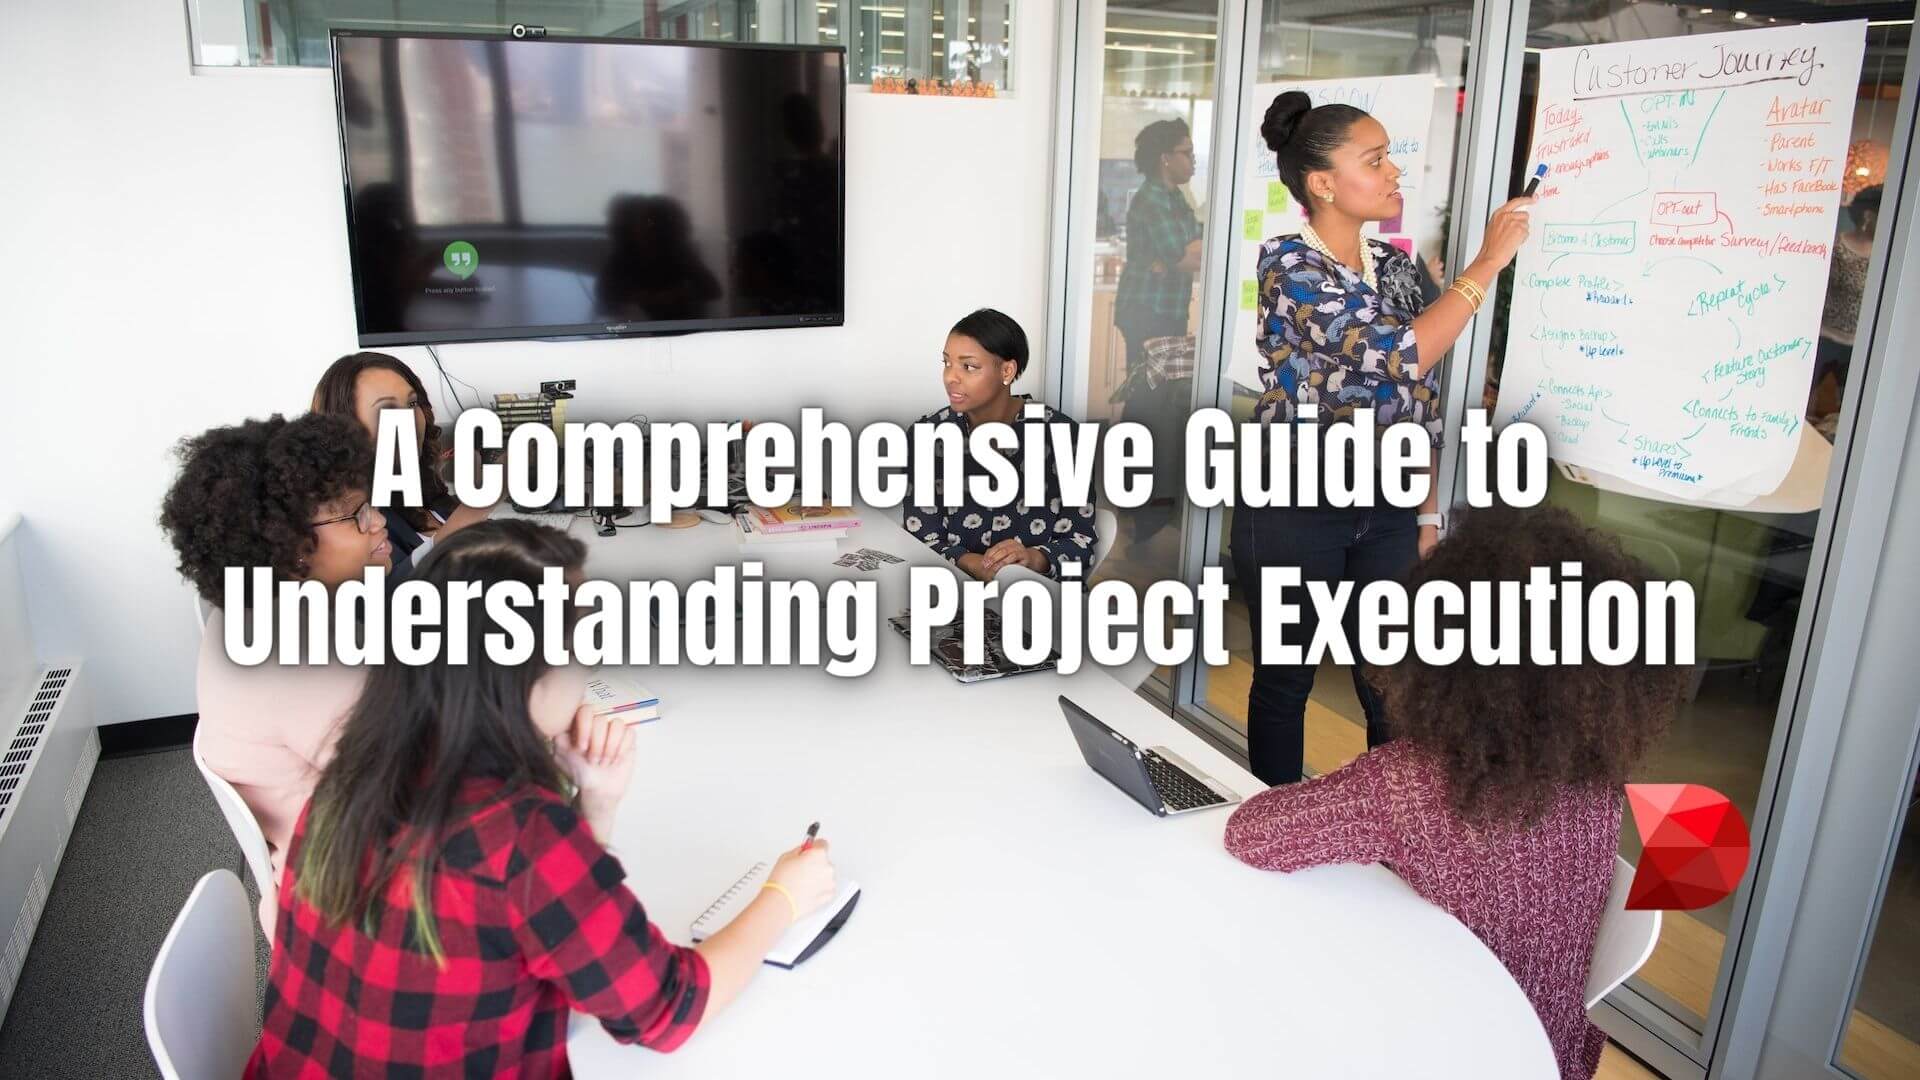 Streamlining a project execution strategy is pivotal to any project's timely and successful completion. Click here to learn how!